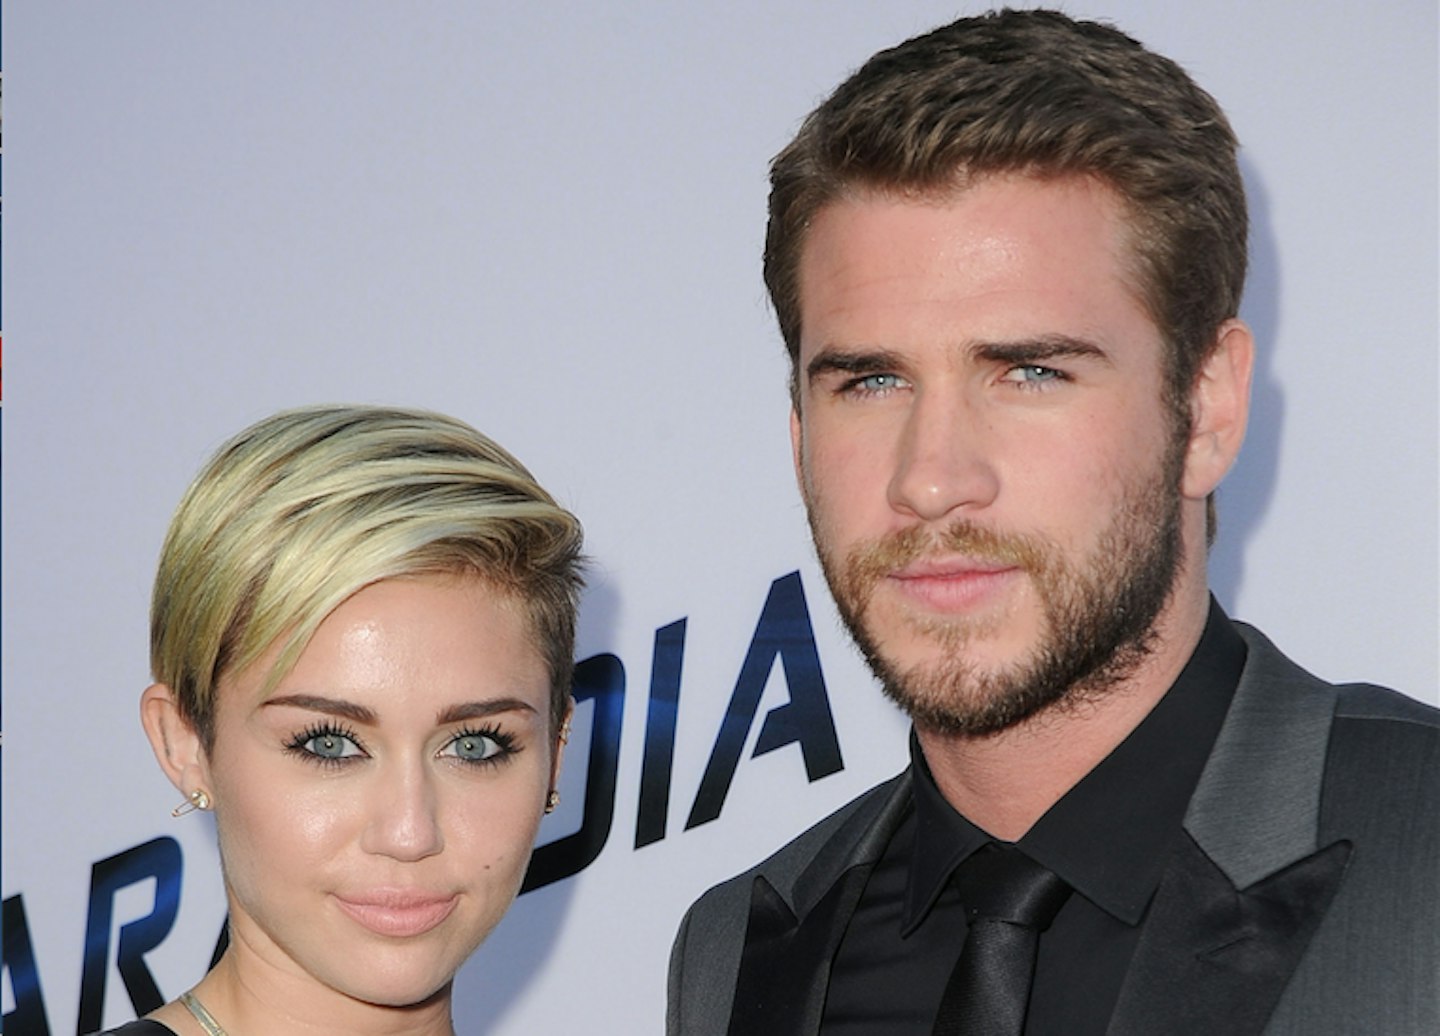 MILEY AND LIAM 